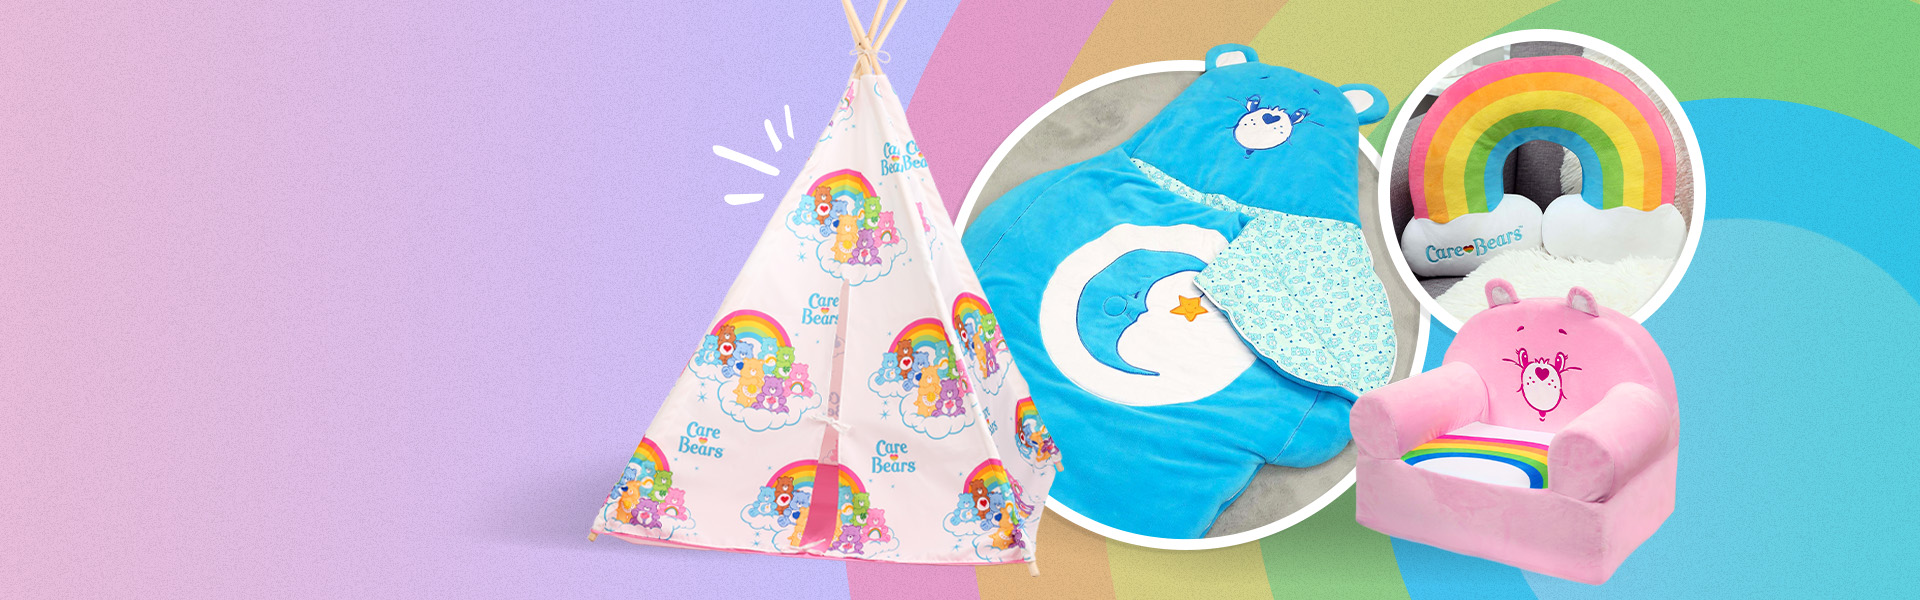 Care Bears Gifts